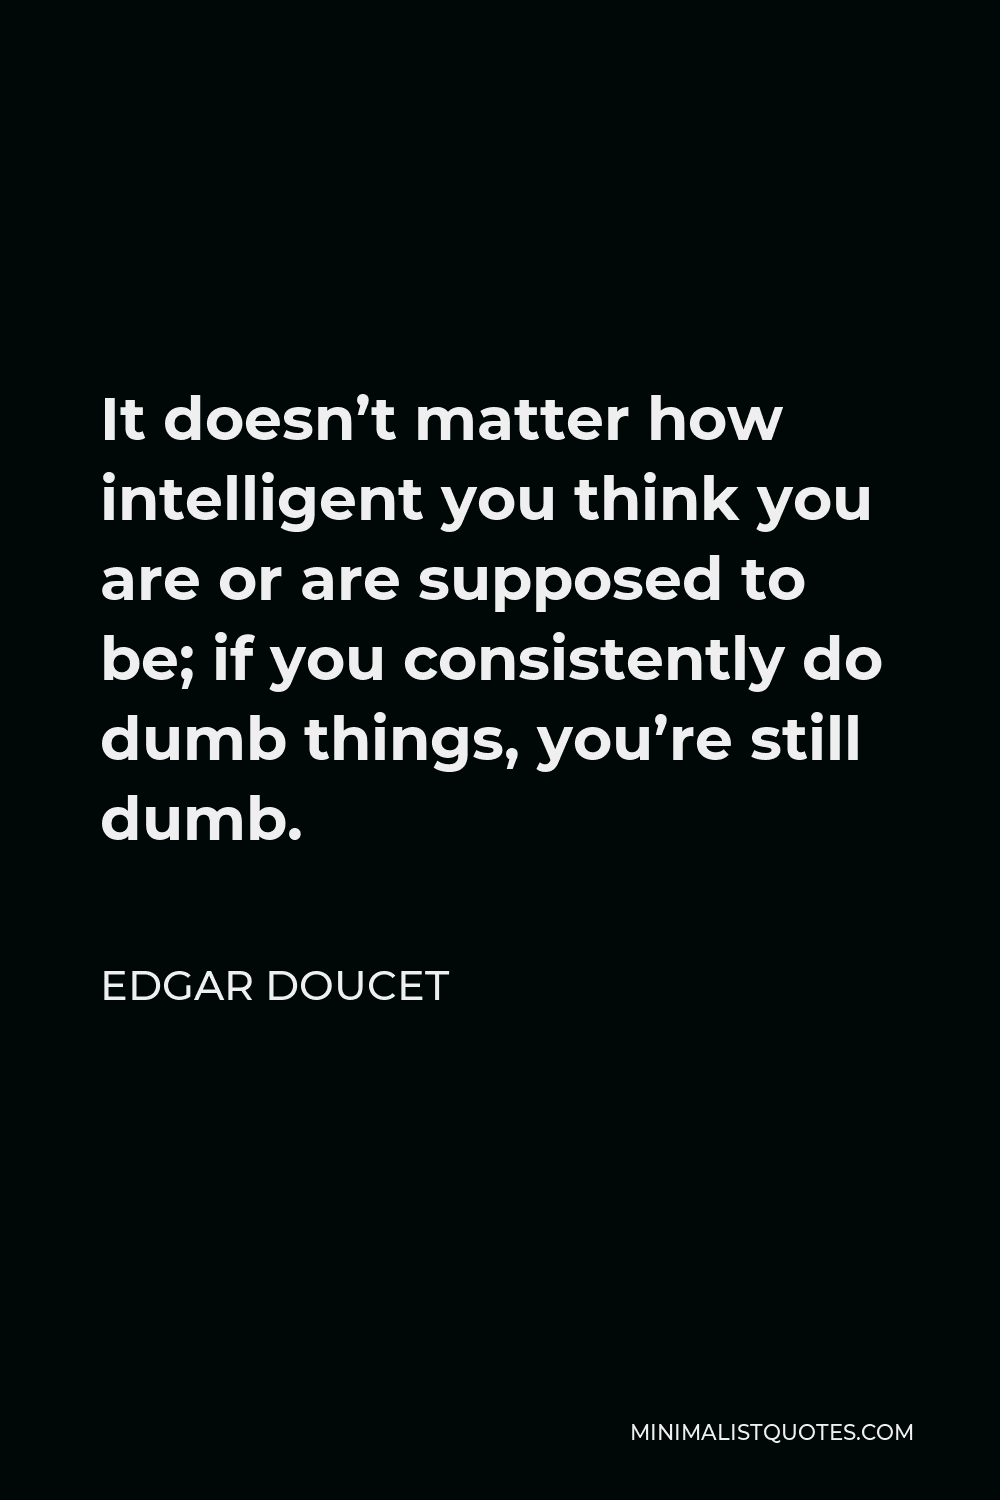 Edgar Doucet Quote - It doesn’t matter how intelligent you think you are or are supposed to be; if you consistently do dumb things, you’re still dumb.